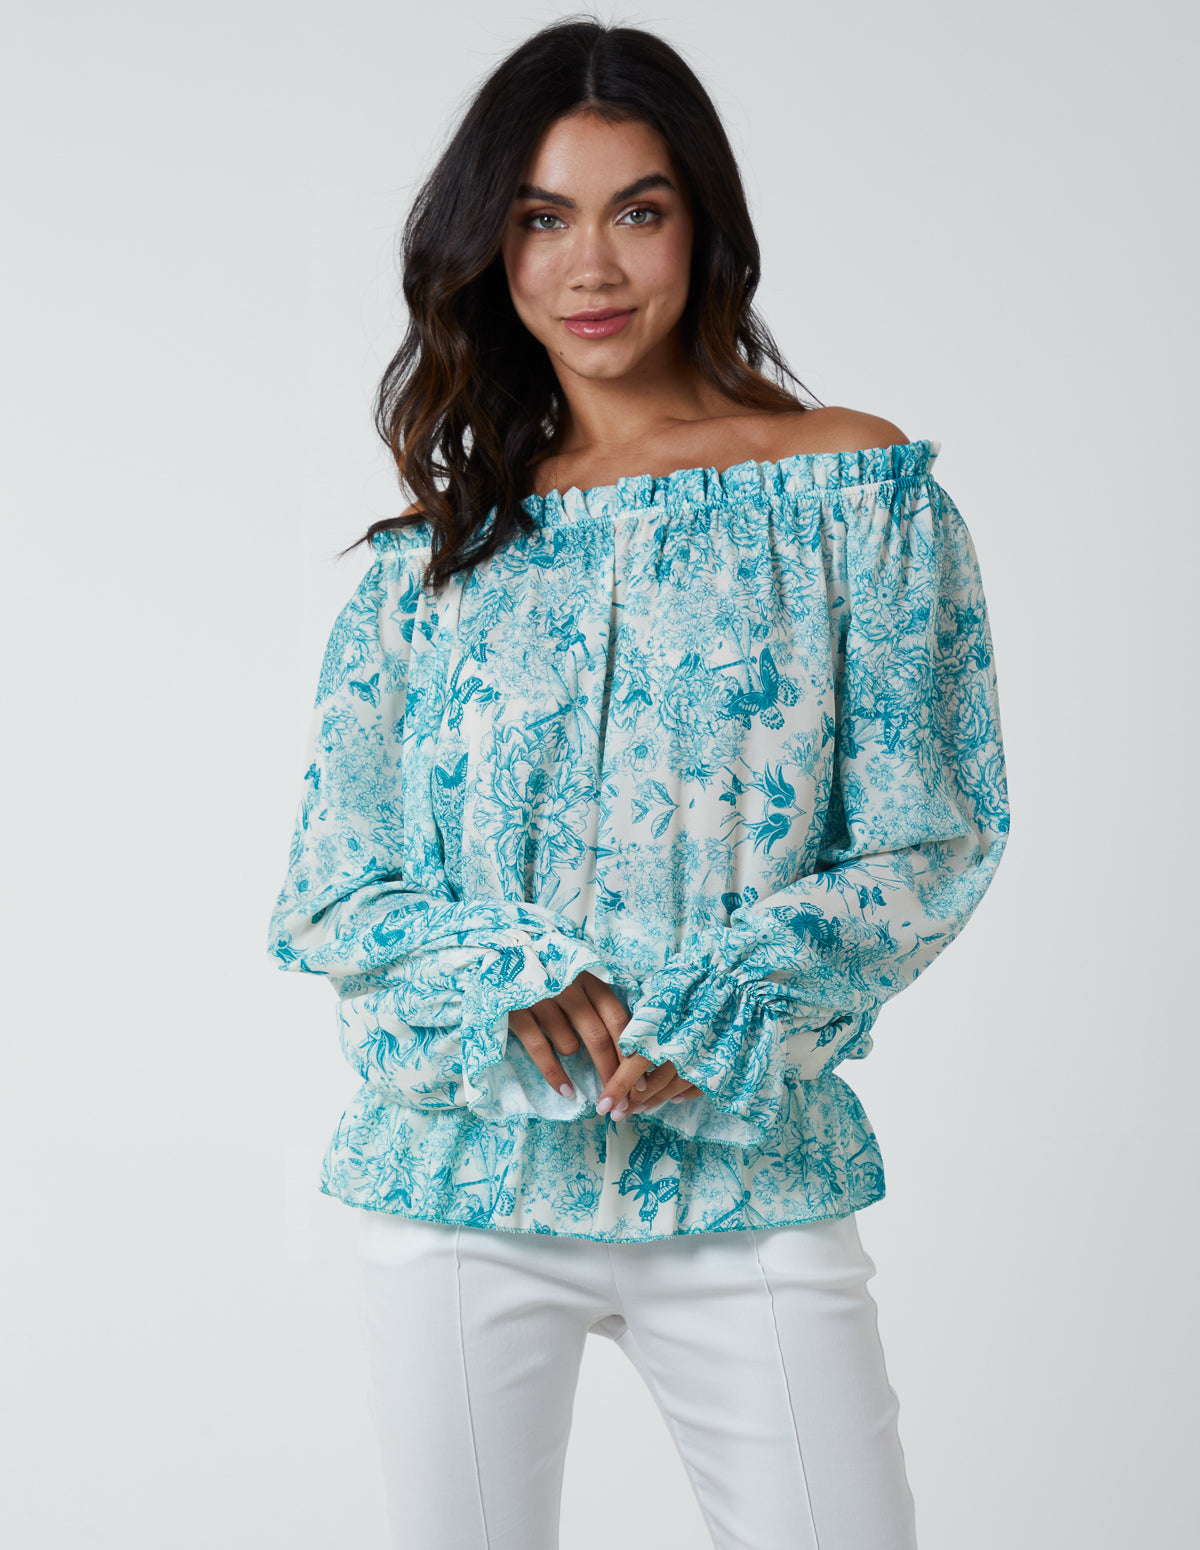 Butterfly Floral Print Gypsy Chiffon Blouse 